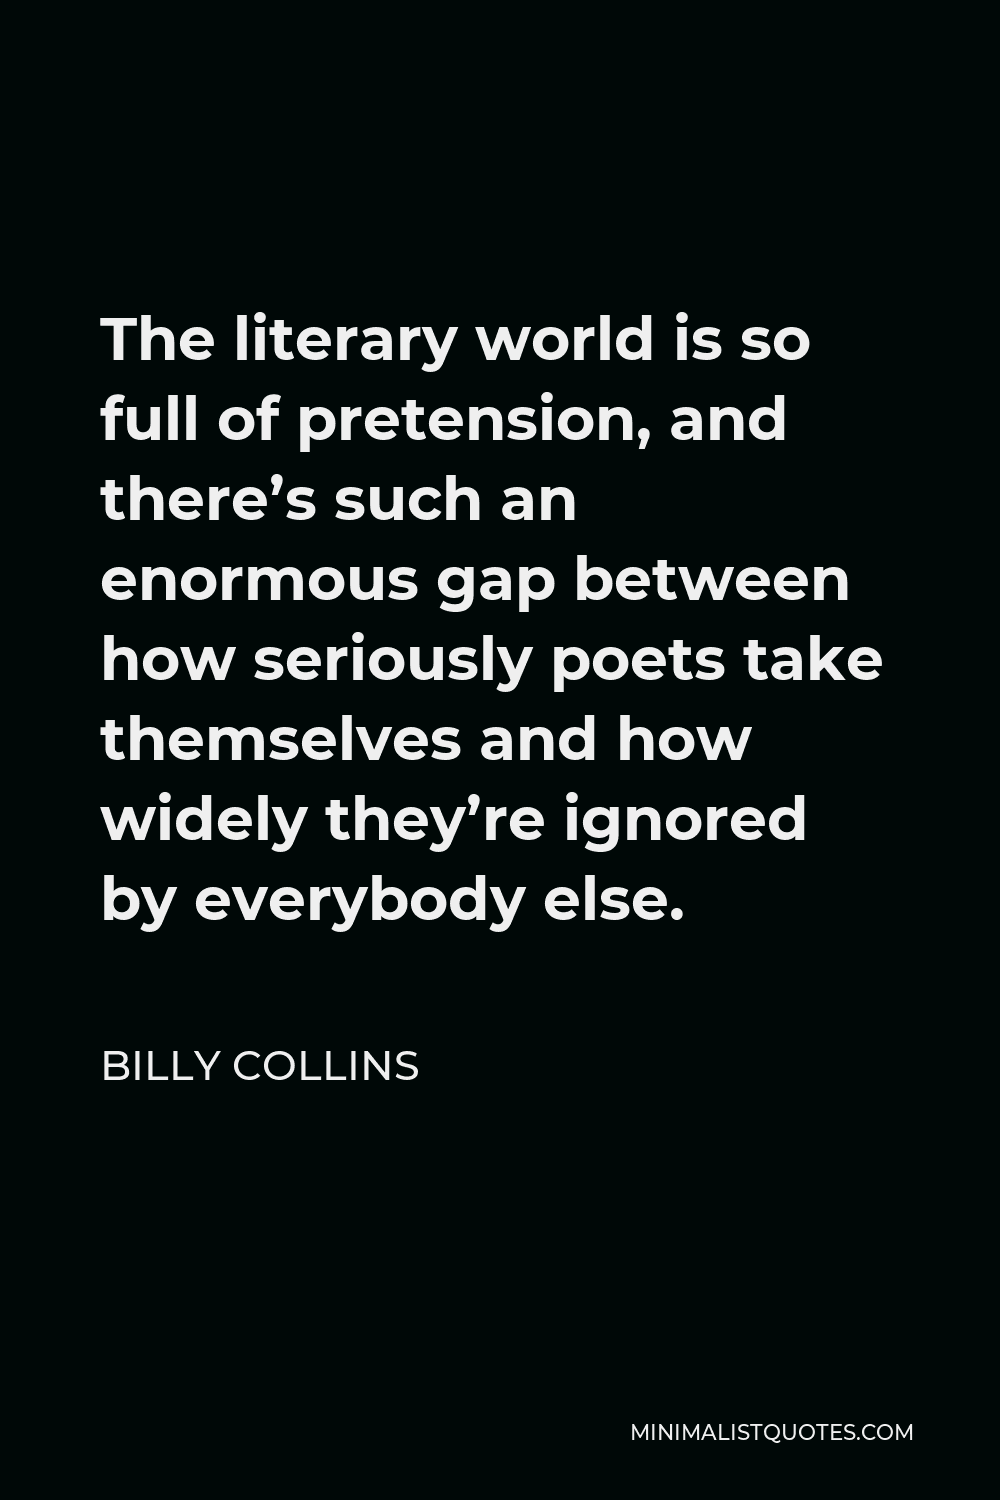 Billy Collins Quote - The literary world is so full of pretension, and there’s such an enormous gap between how seriously poets take themselves and how widely they’re ignored by everybody else.